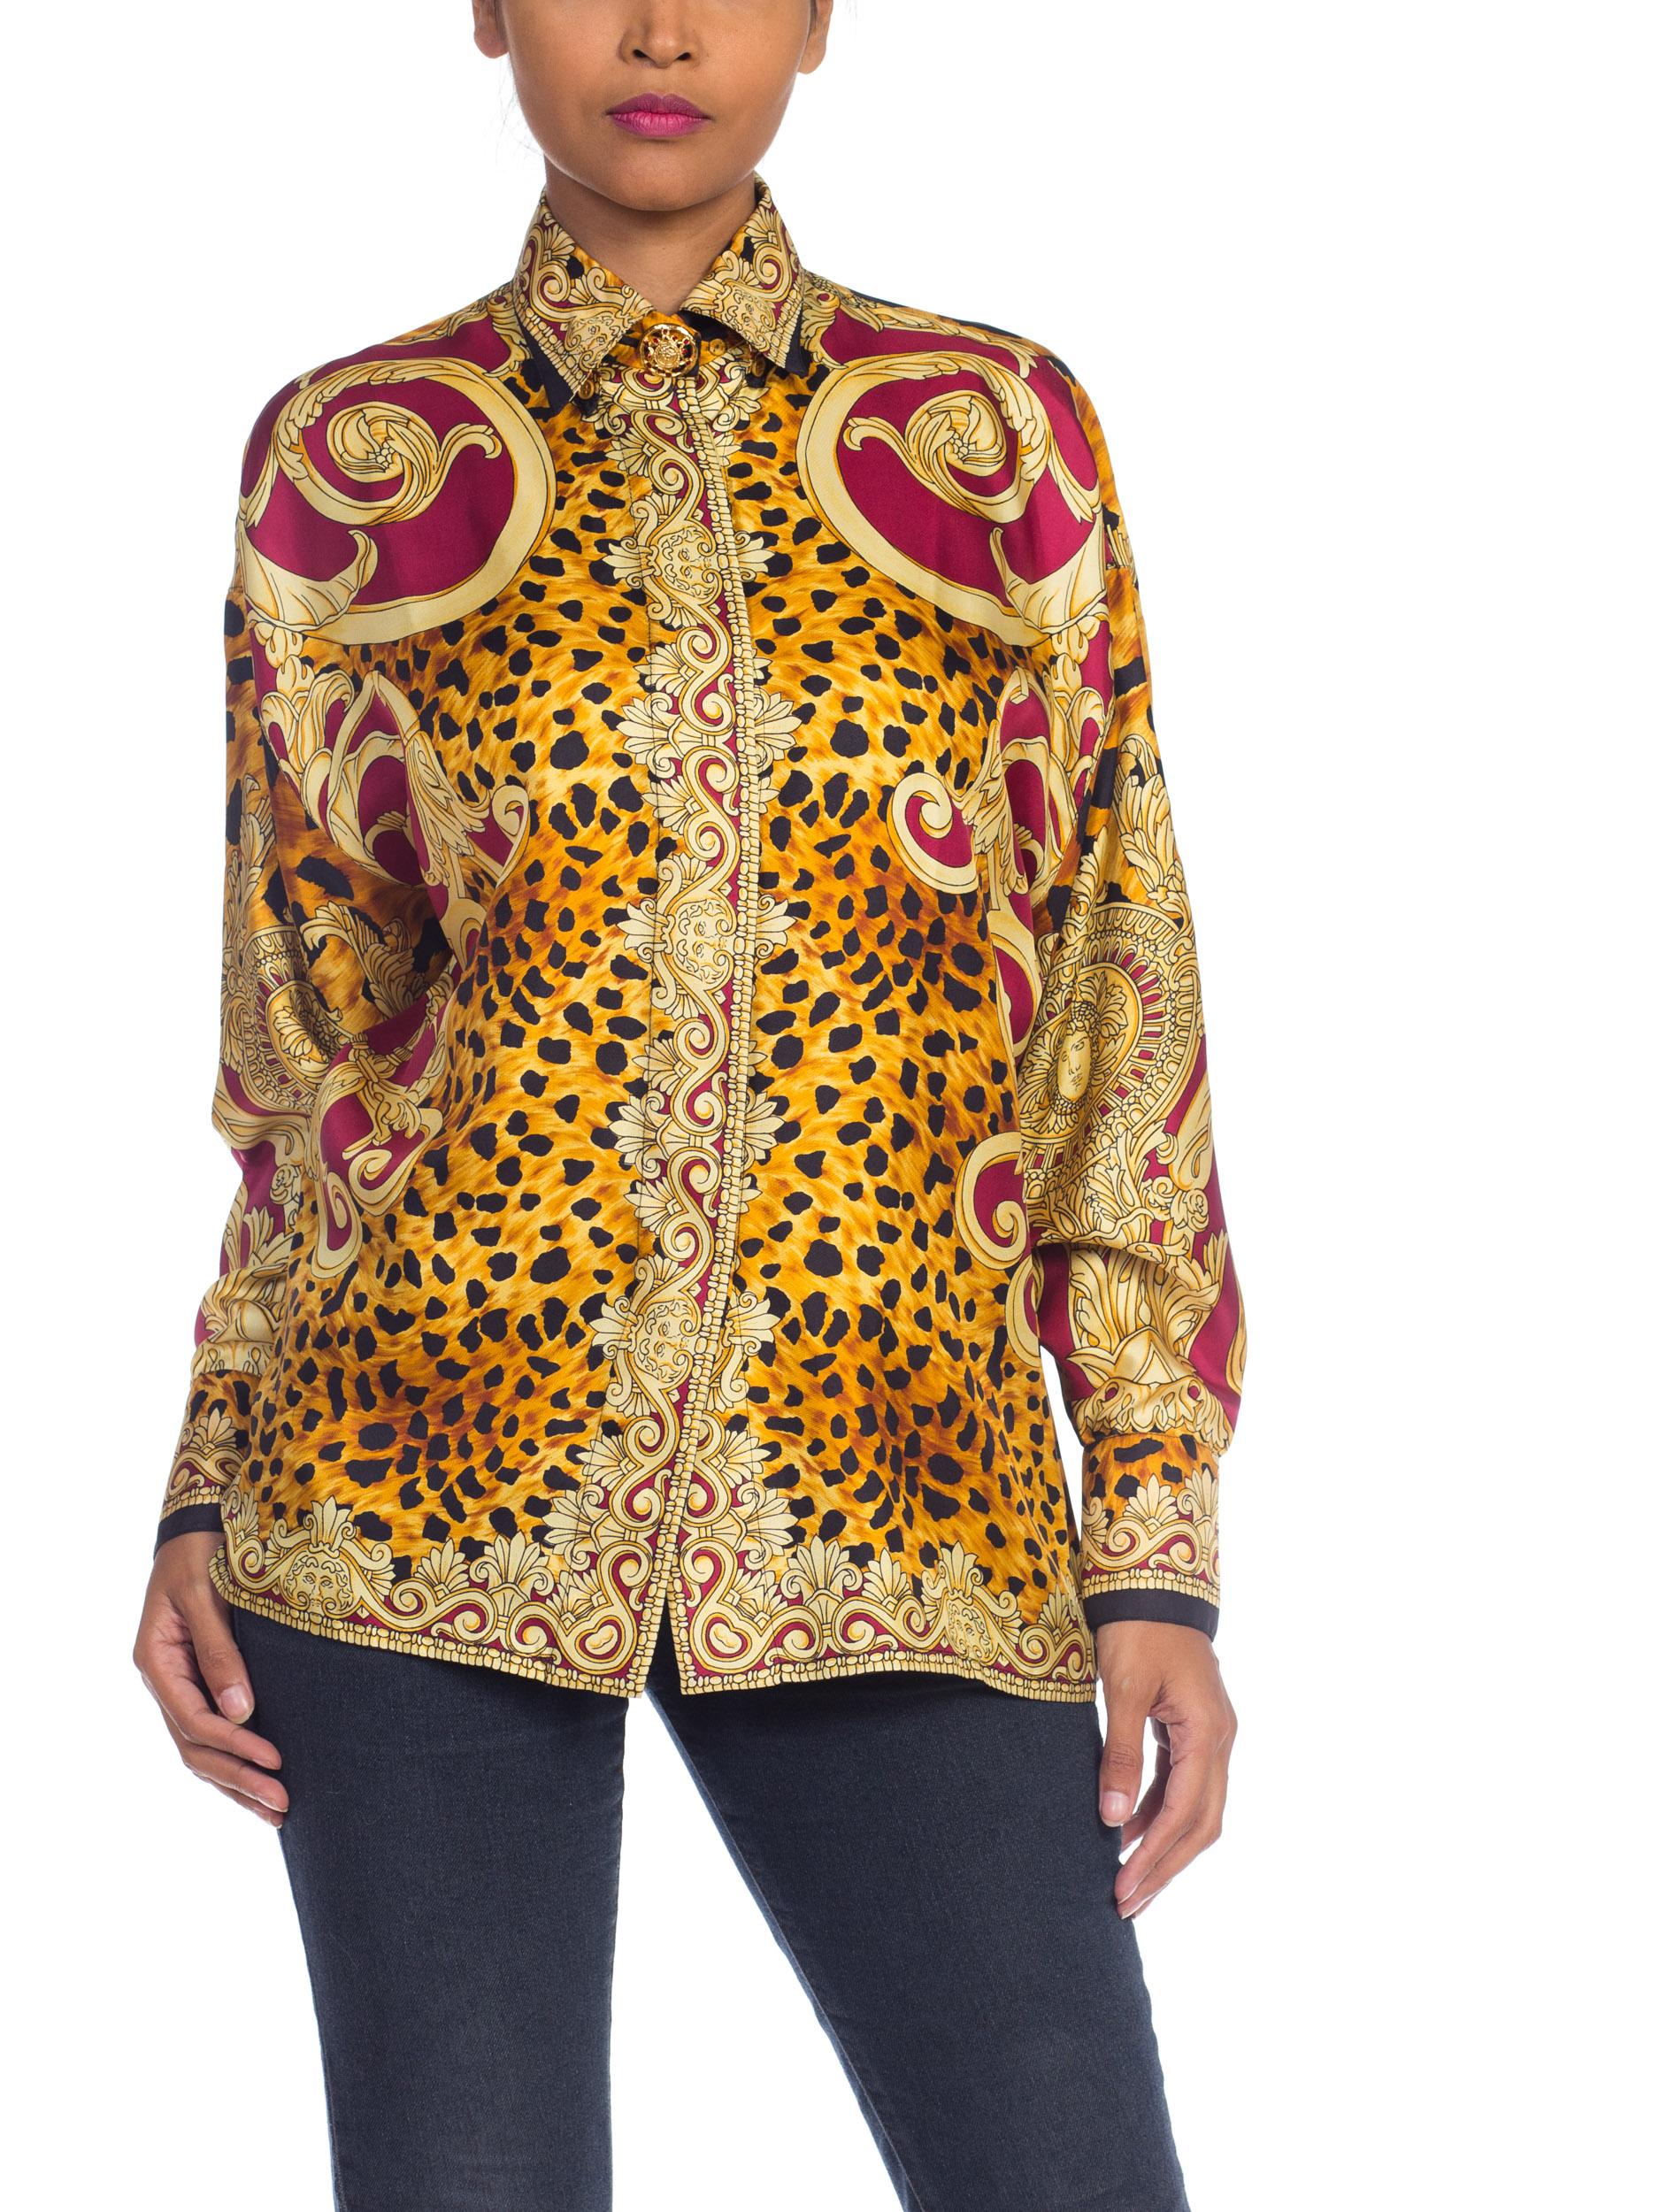 Women's 1990S GIANNI VERSACE Gold Baroque & Leopard Silk Shirt With Crystals Buttons